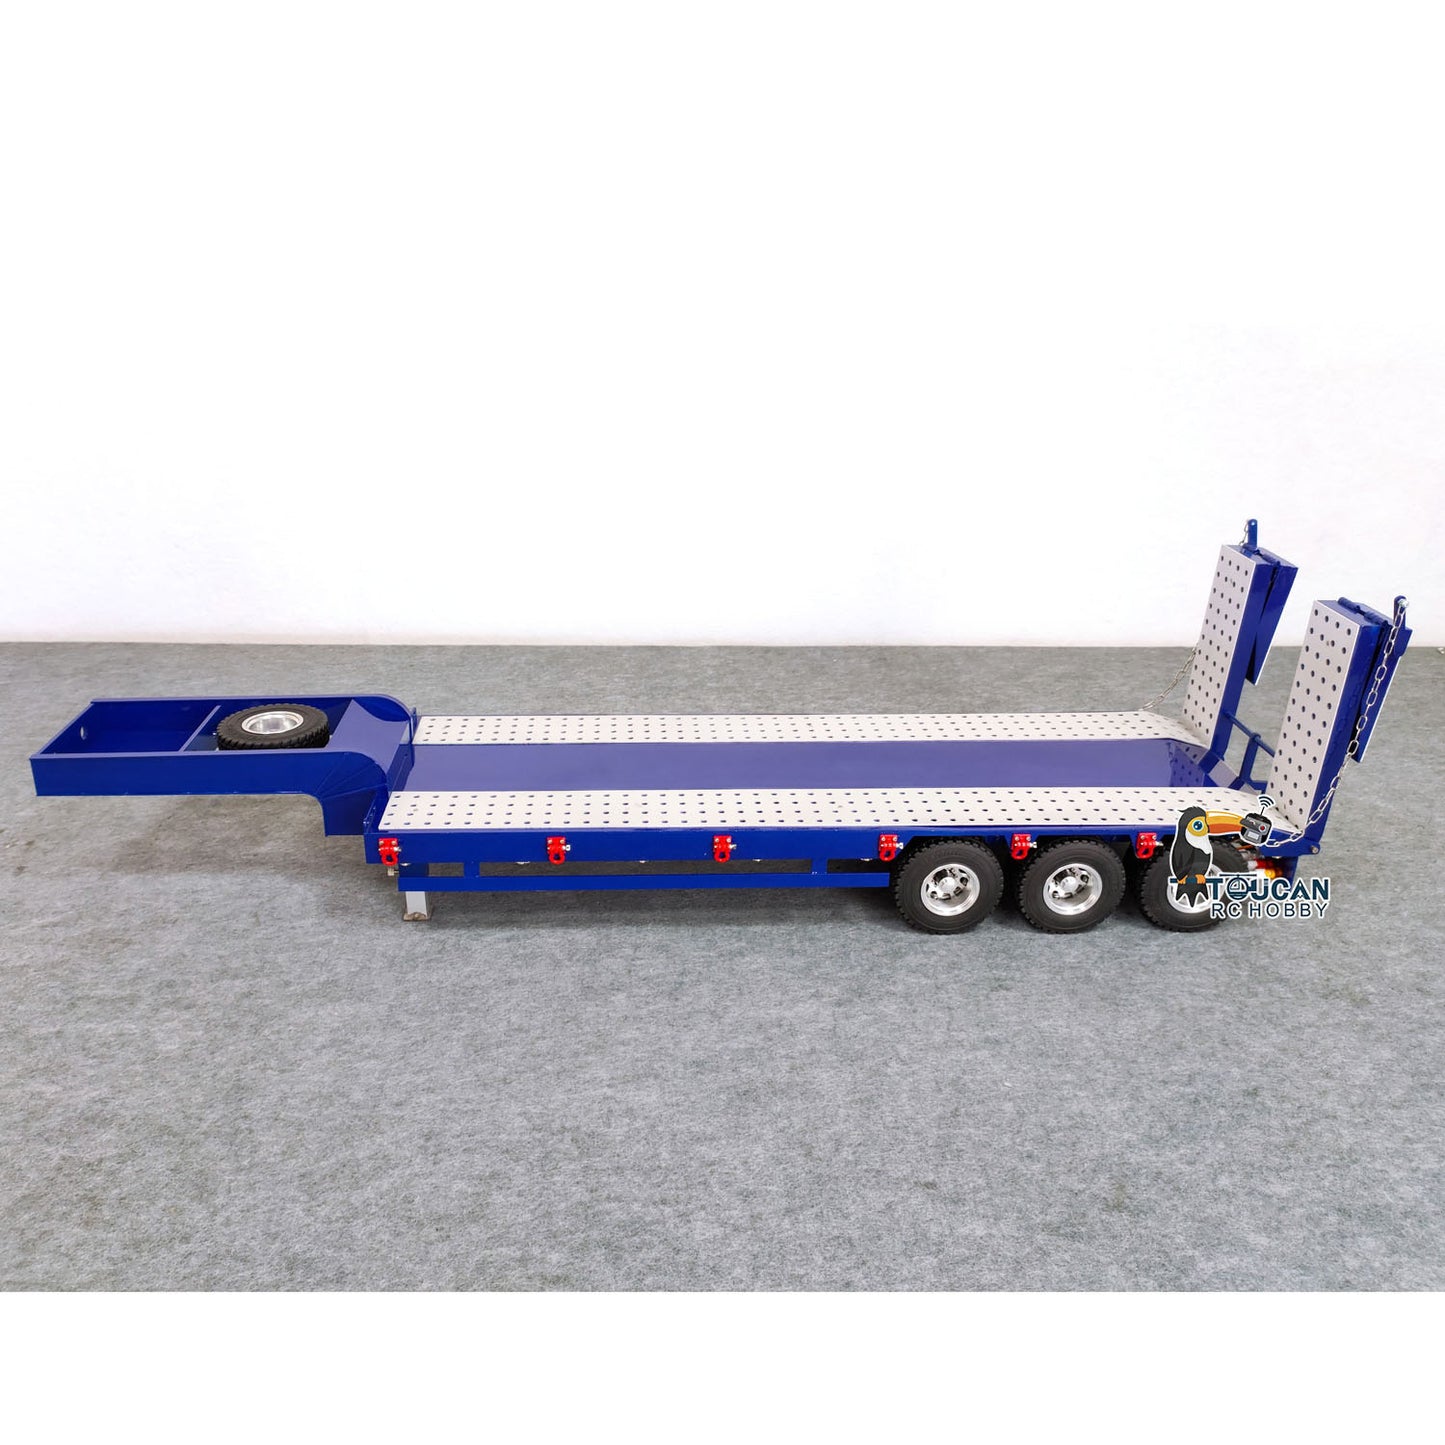 1/14 3 Axles Metal Trailer 2-section Electric Tailboard for RC Tractor Radio Controlled Truck Electric Car Painted